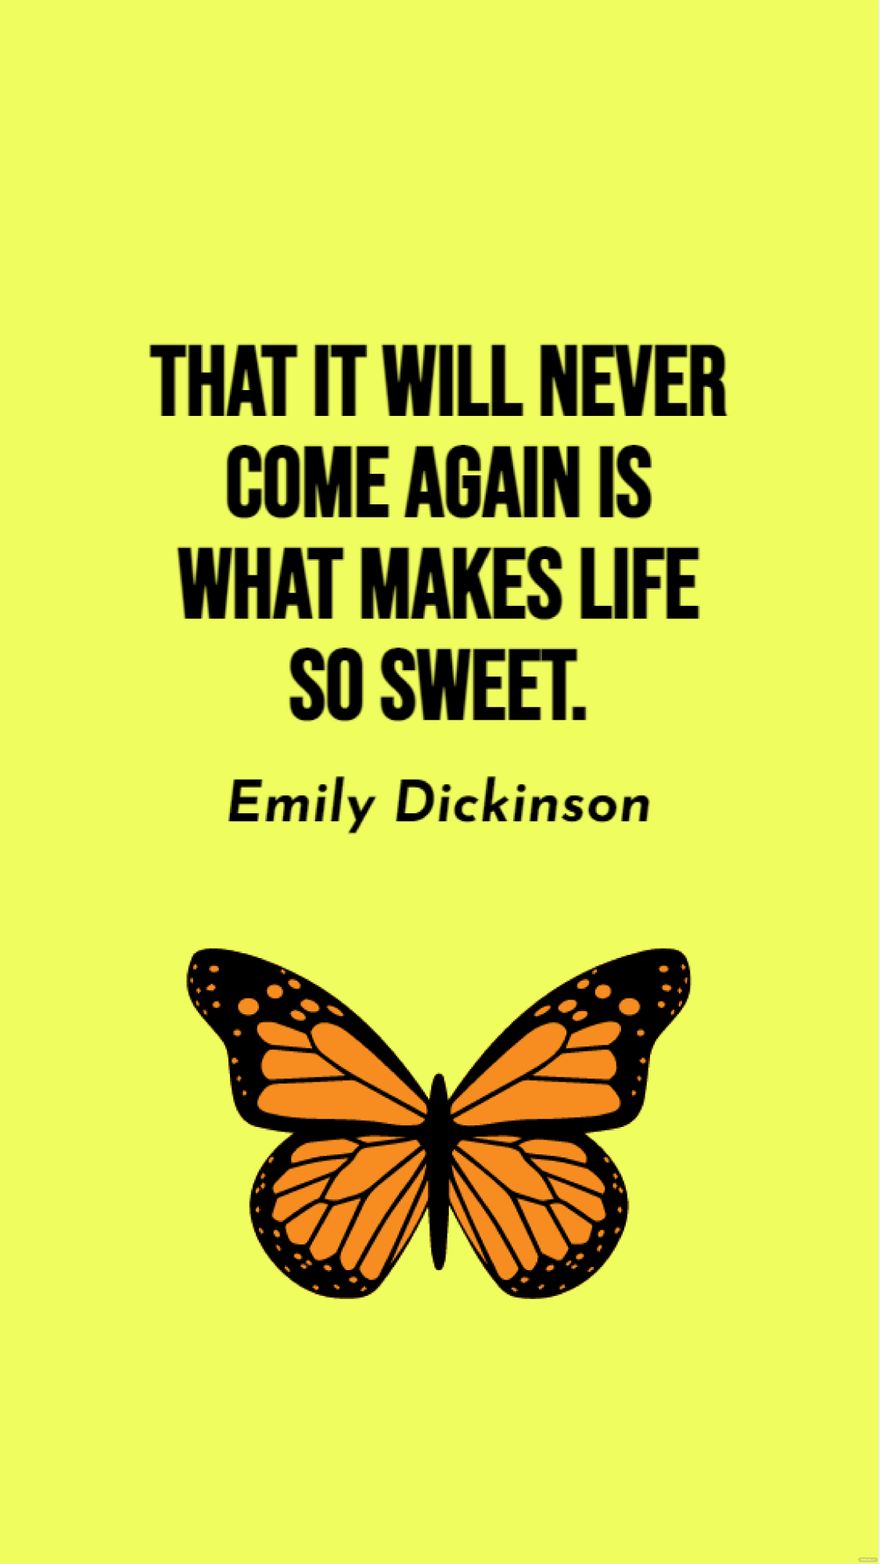 Free Emily Dickinson - That it will never come again is what makes life so sweet.